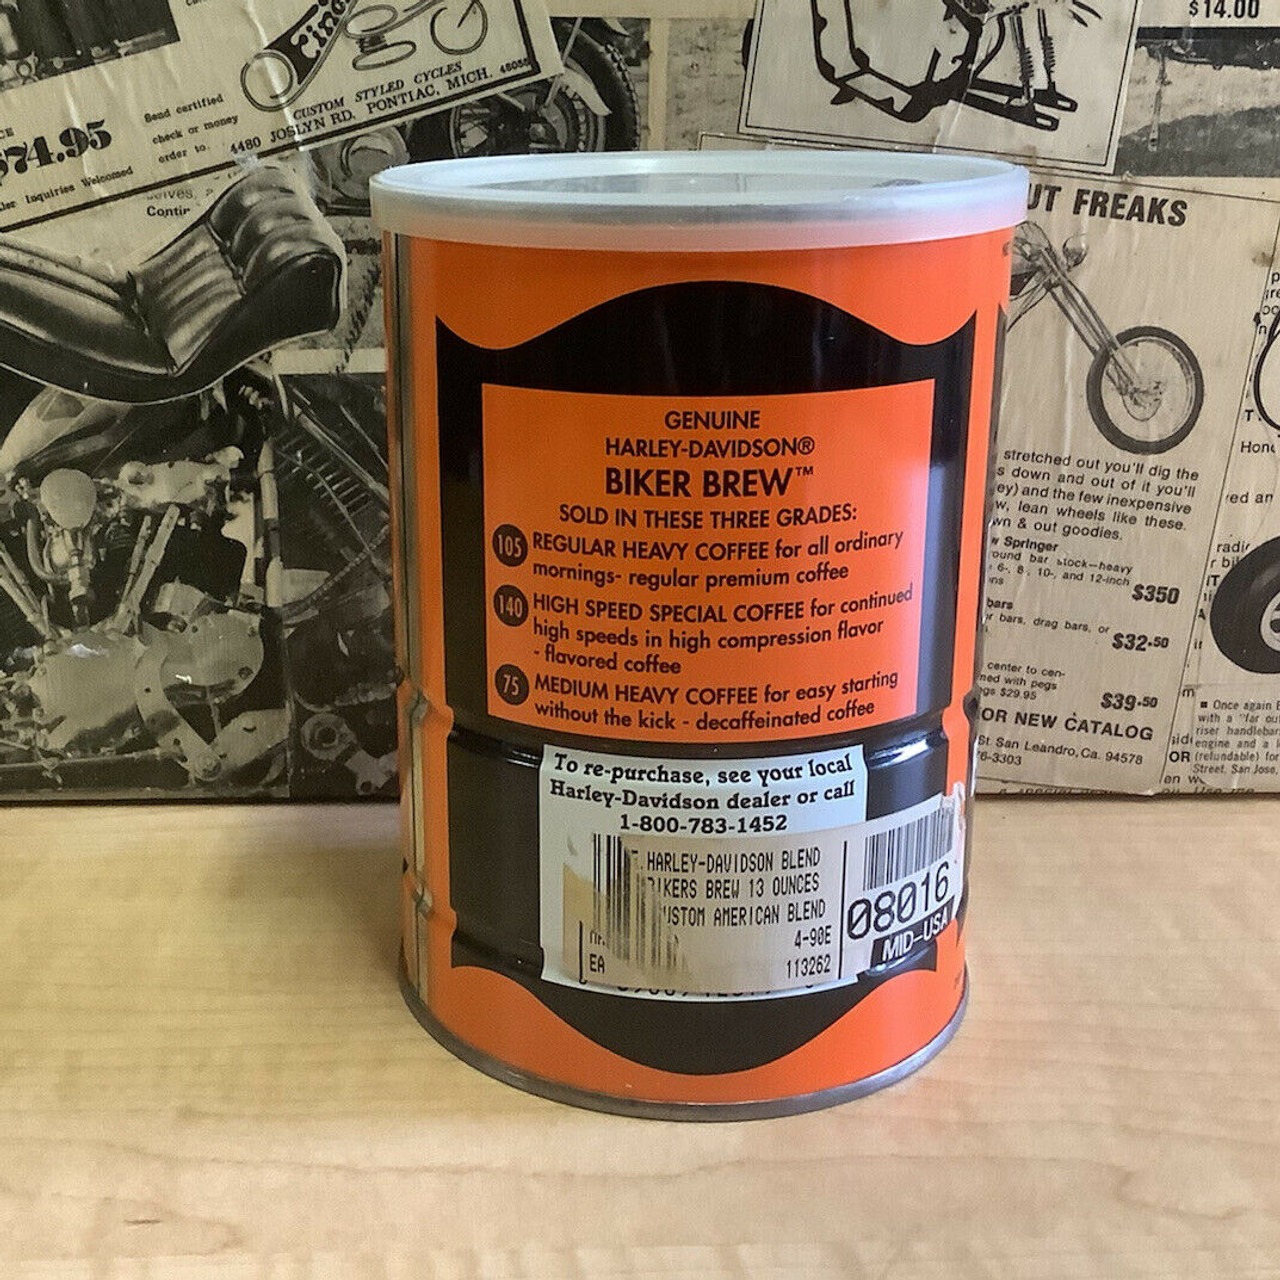 Harley-Davidson Biker Brew can of coffee NEW SEALED for display only